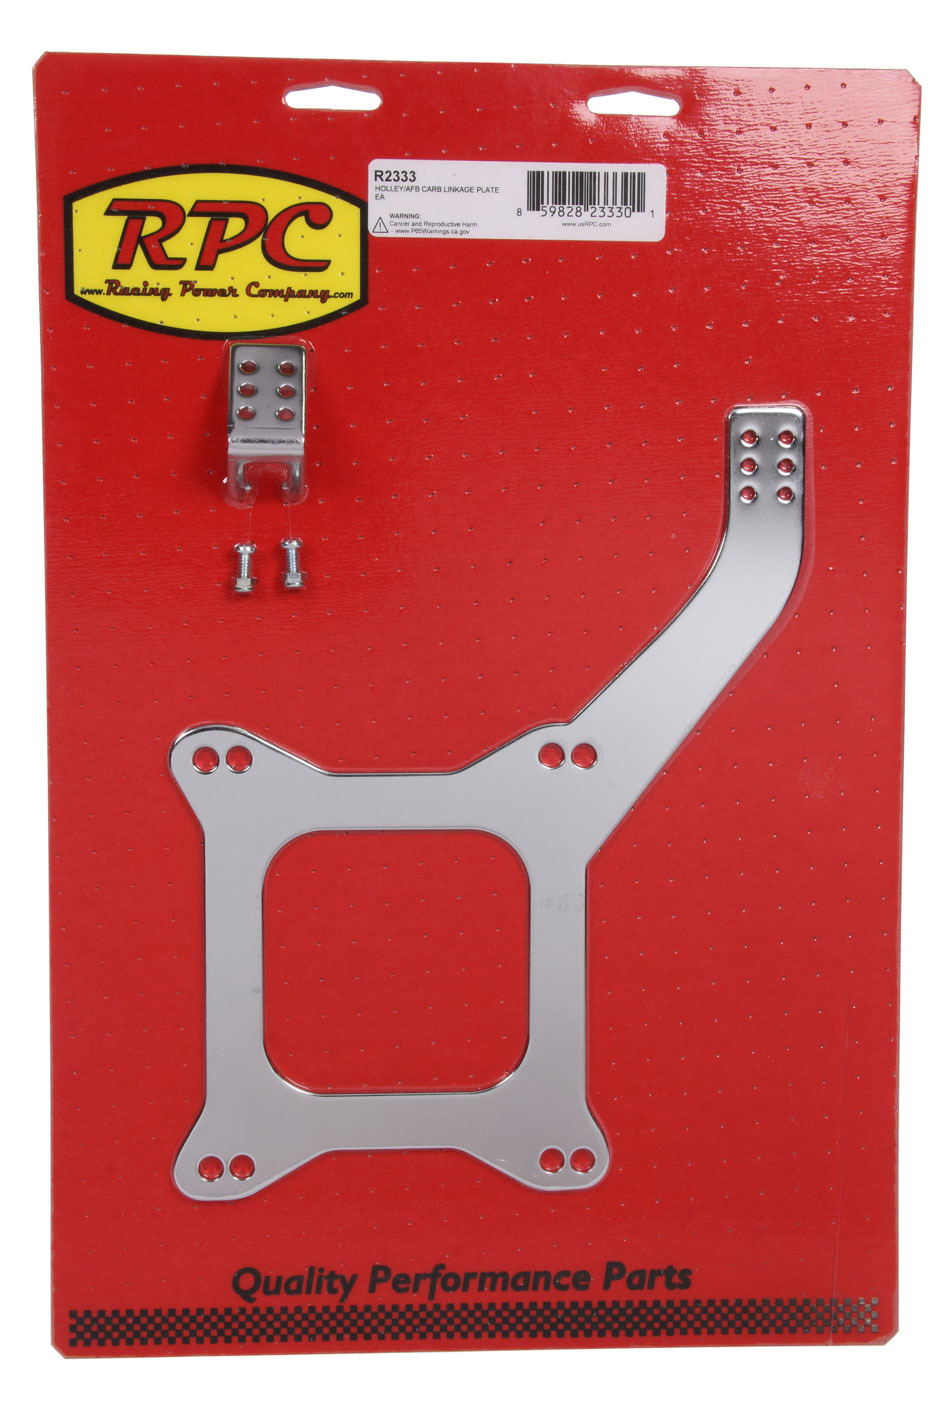 Racing Power Company R2333 Throttle Cable Bracket, 4 Hole Under Carb Mount, Steel, Chrome, Square Bore, Kit